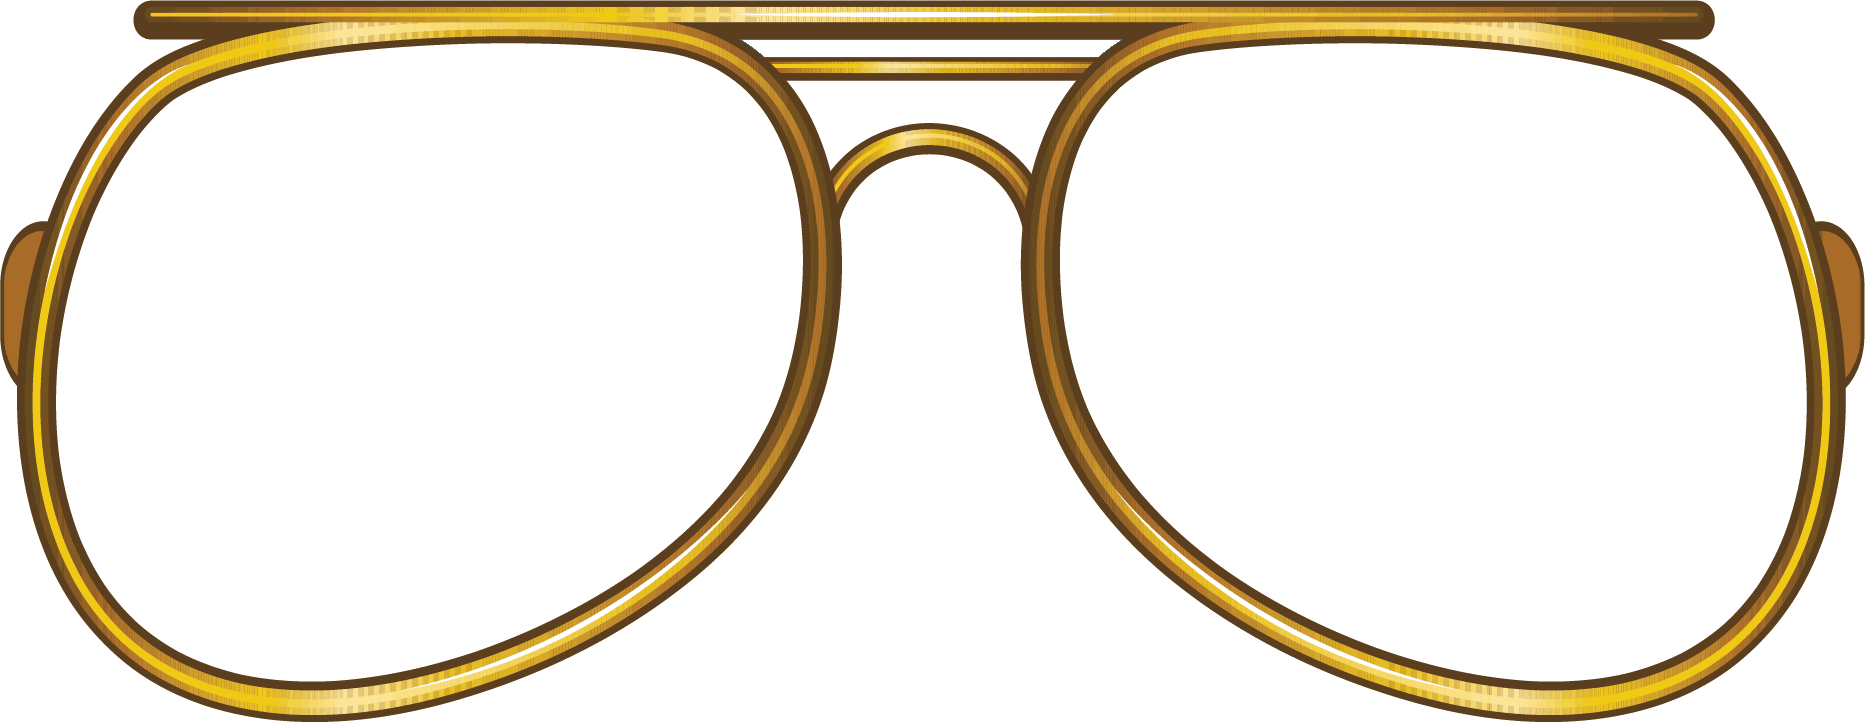 Gold glasses cliparts zone. Glass clipart optical